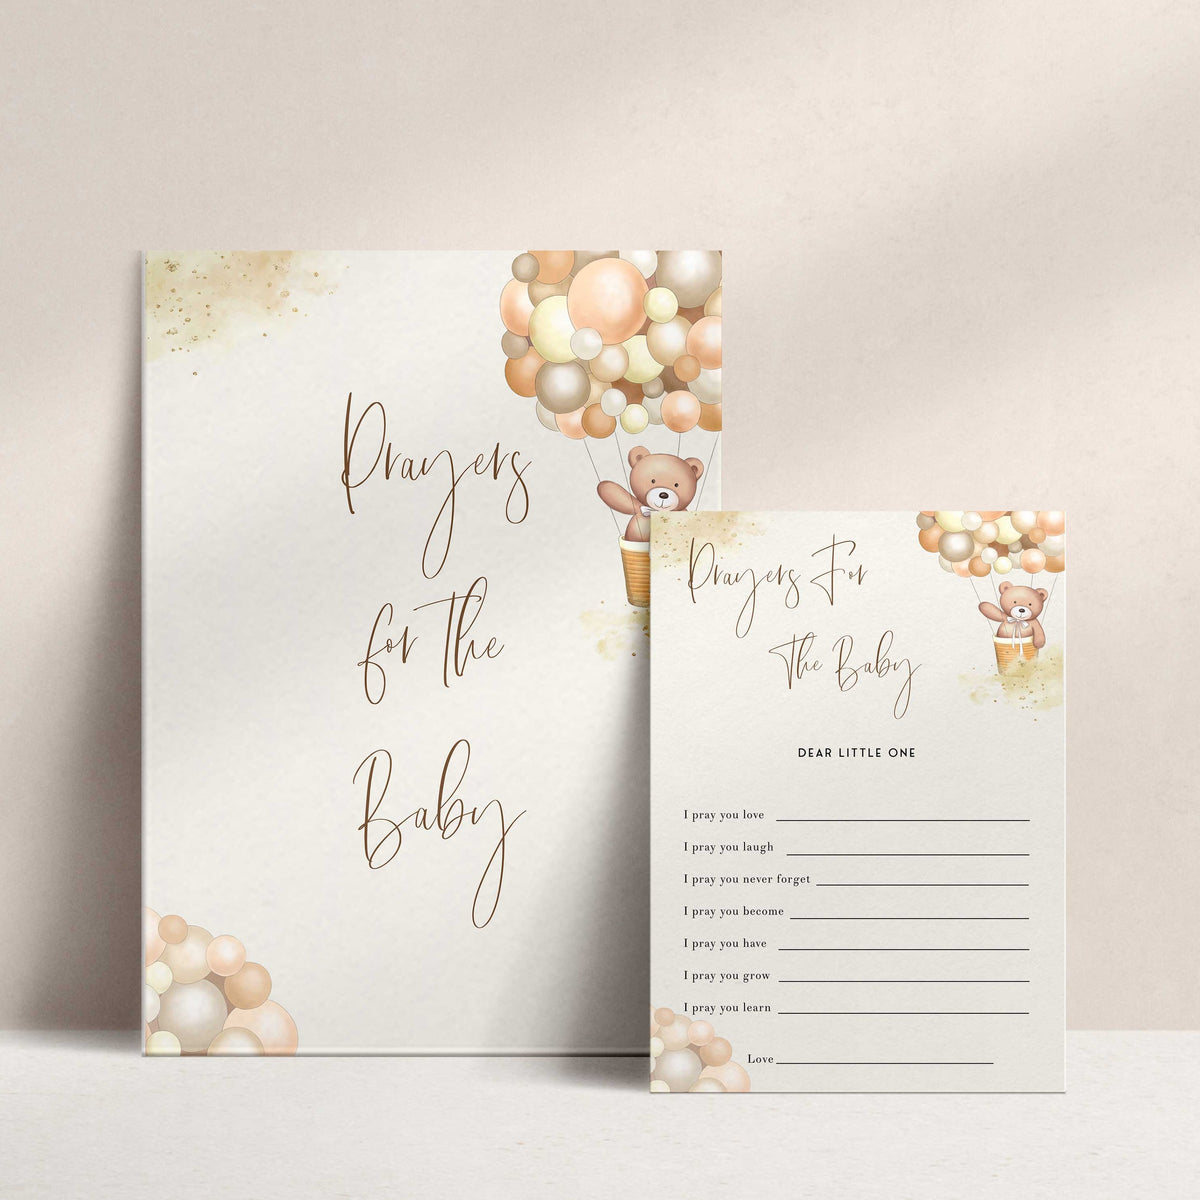 Fully editable and printable baby shower prayers for the baby game with a hot air balloon teddy bear, we can bearly wait design. Perfect for a We Can Bearly Wait baby shower themed party